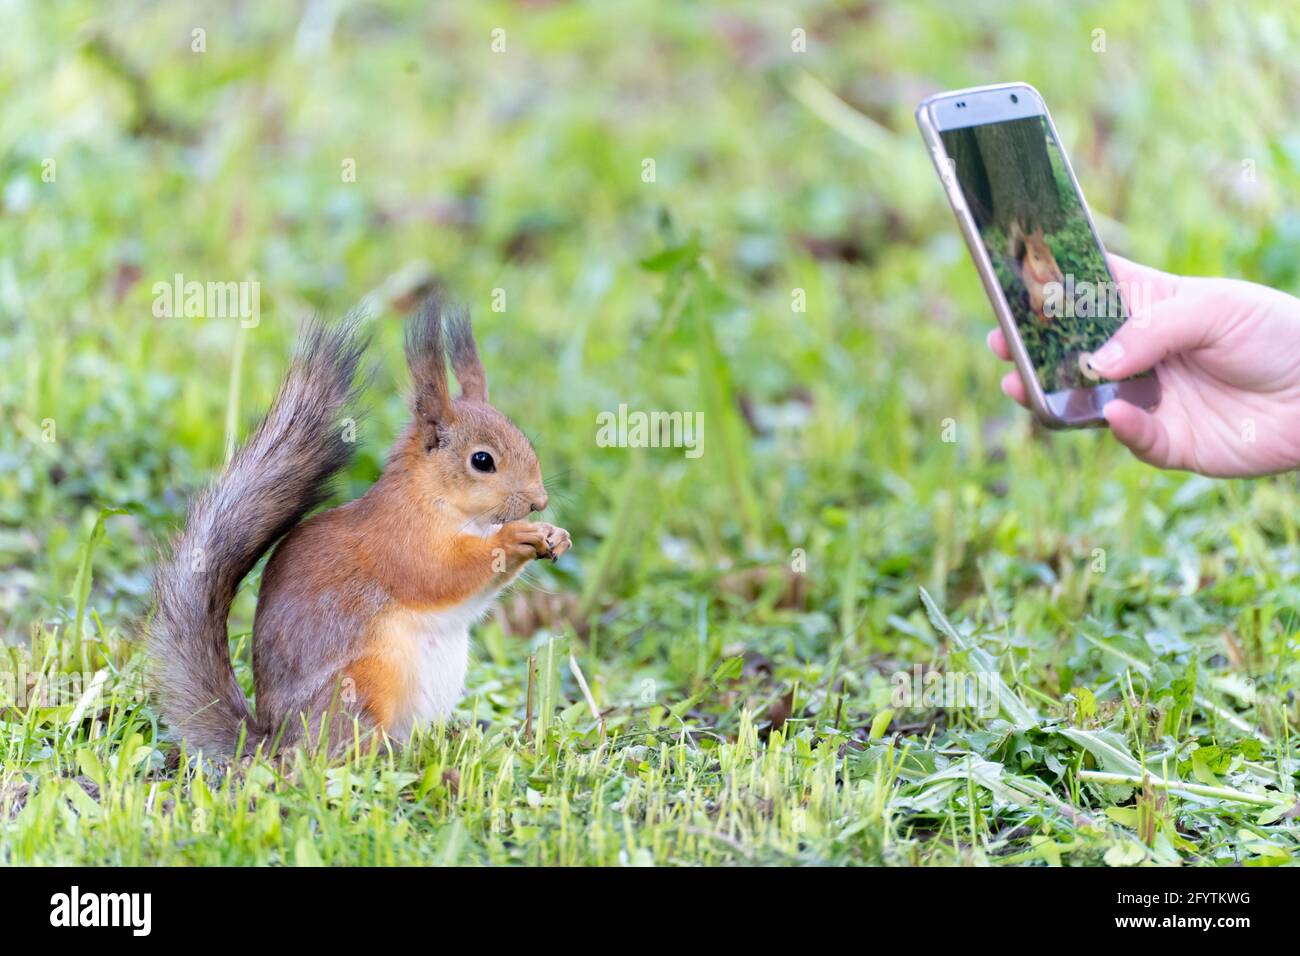 people taking photo of red squirrel eats in park Stock Photo